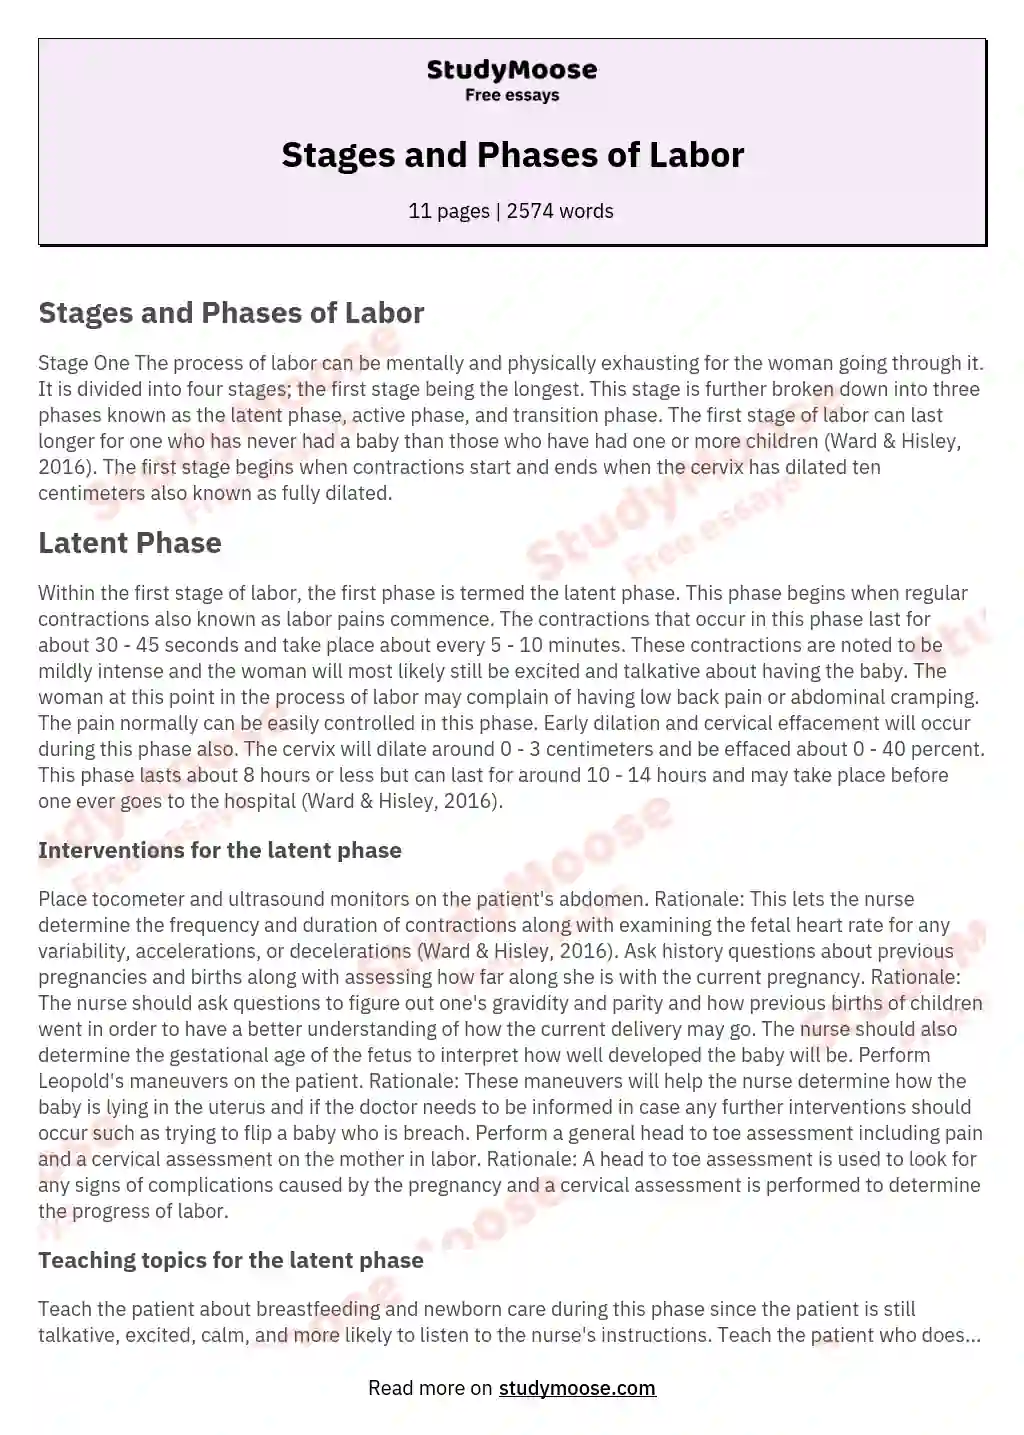 Stages and Phases of Labor essay